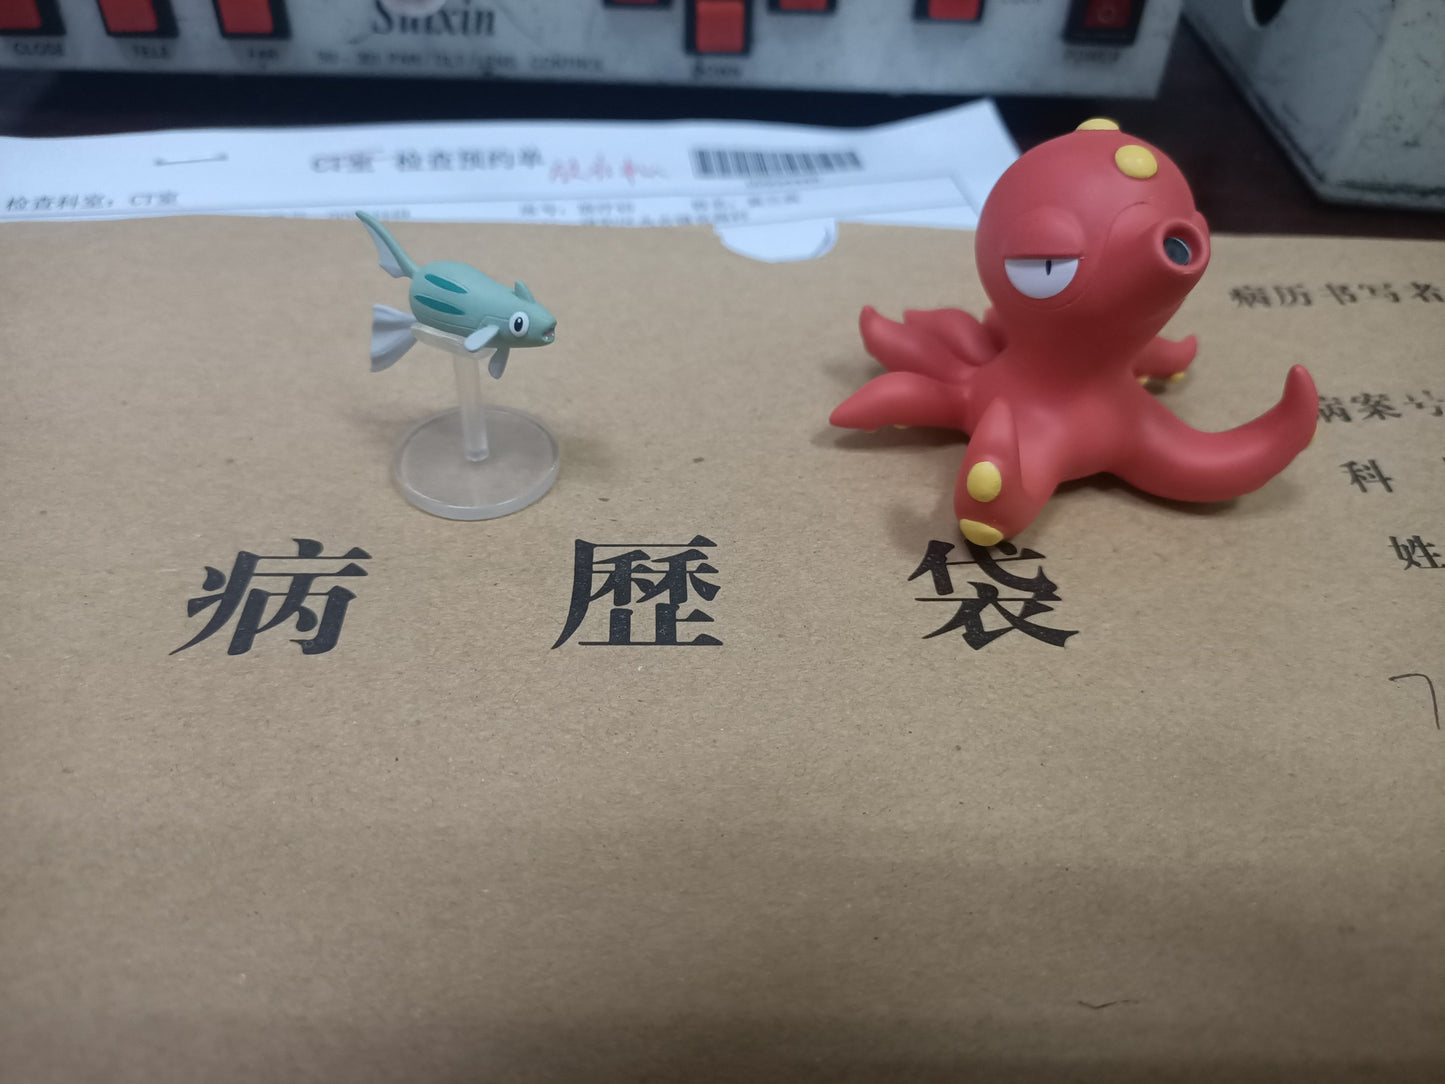 〖Sold Out〗Pokemon Scale World Remoraid Octillery Mantine Mantyke #223 #224 #226 #458 1:20 - CPP Studio